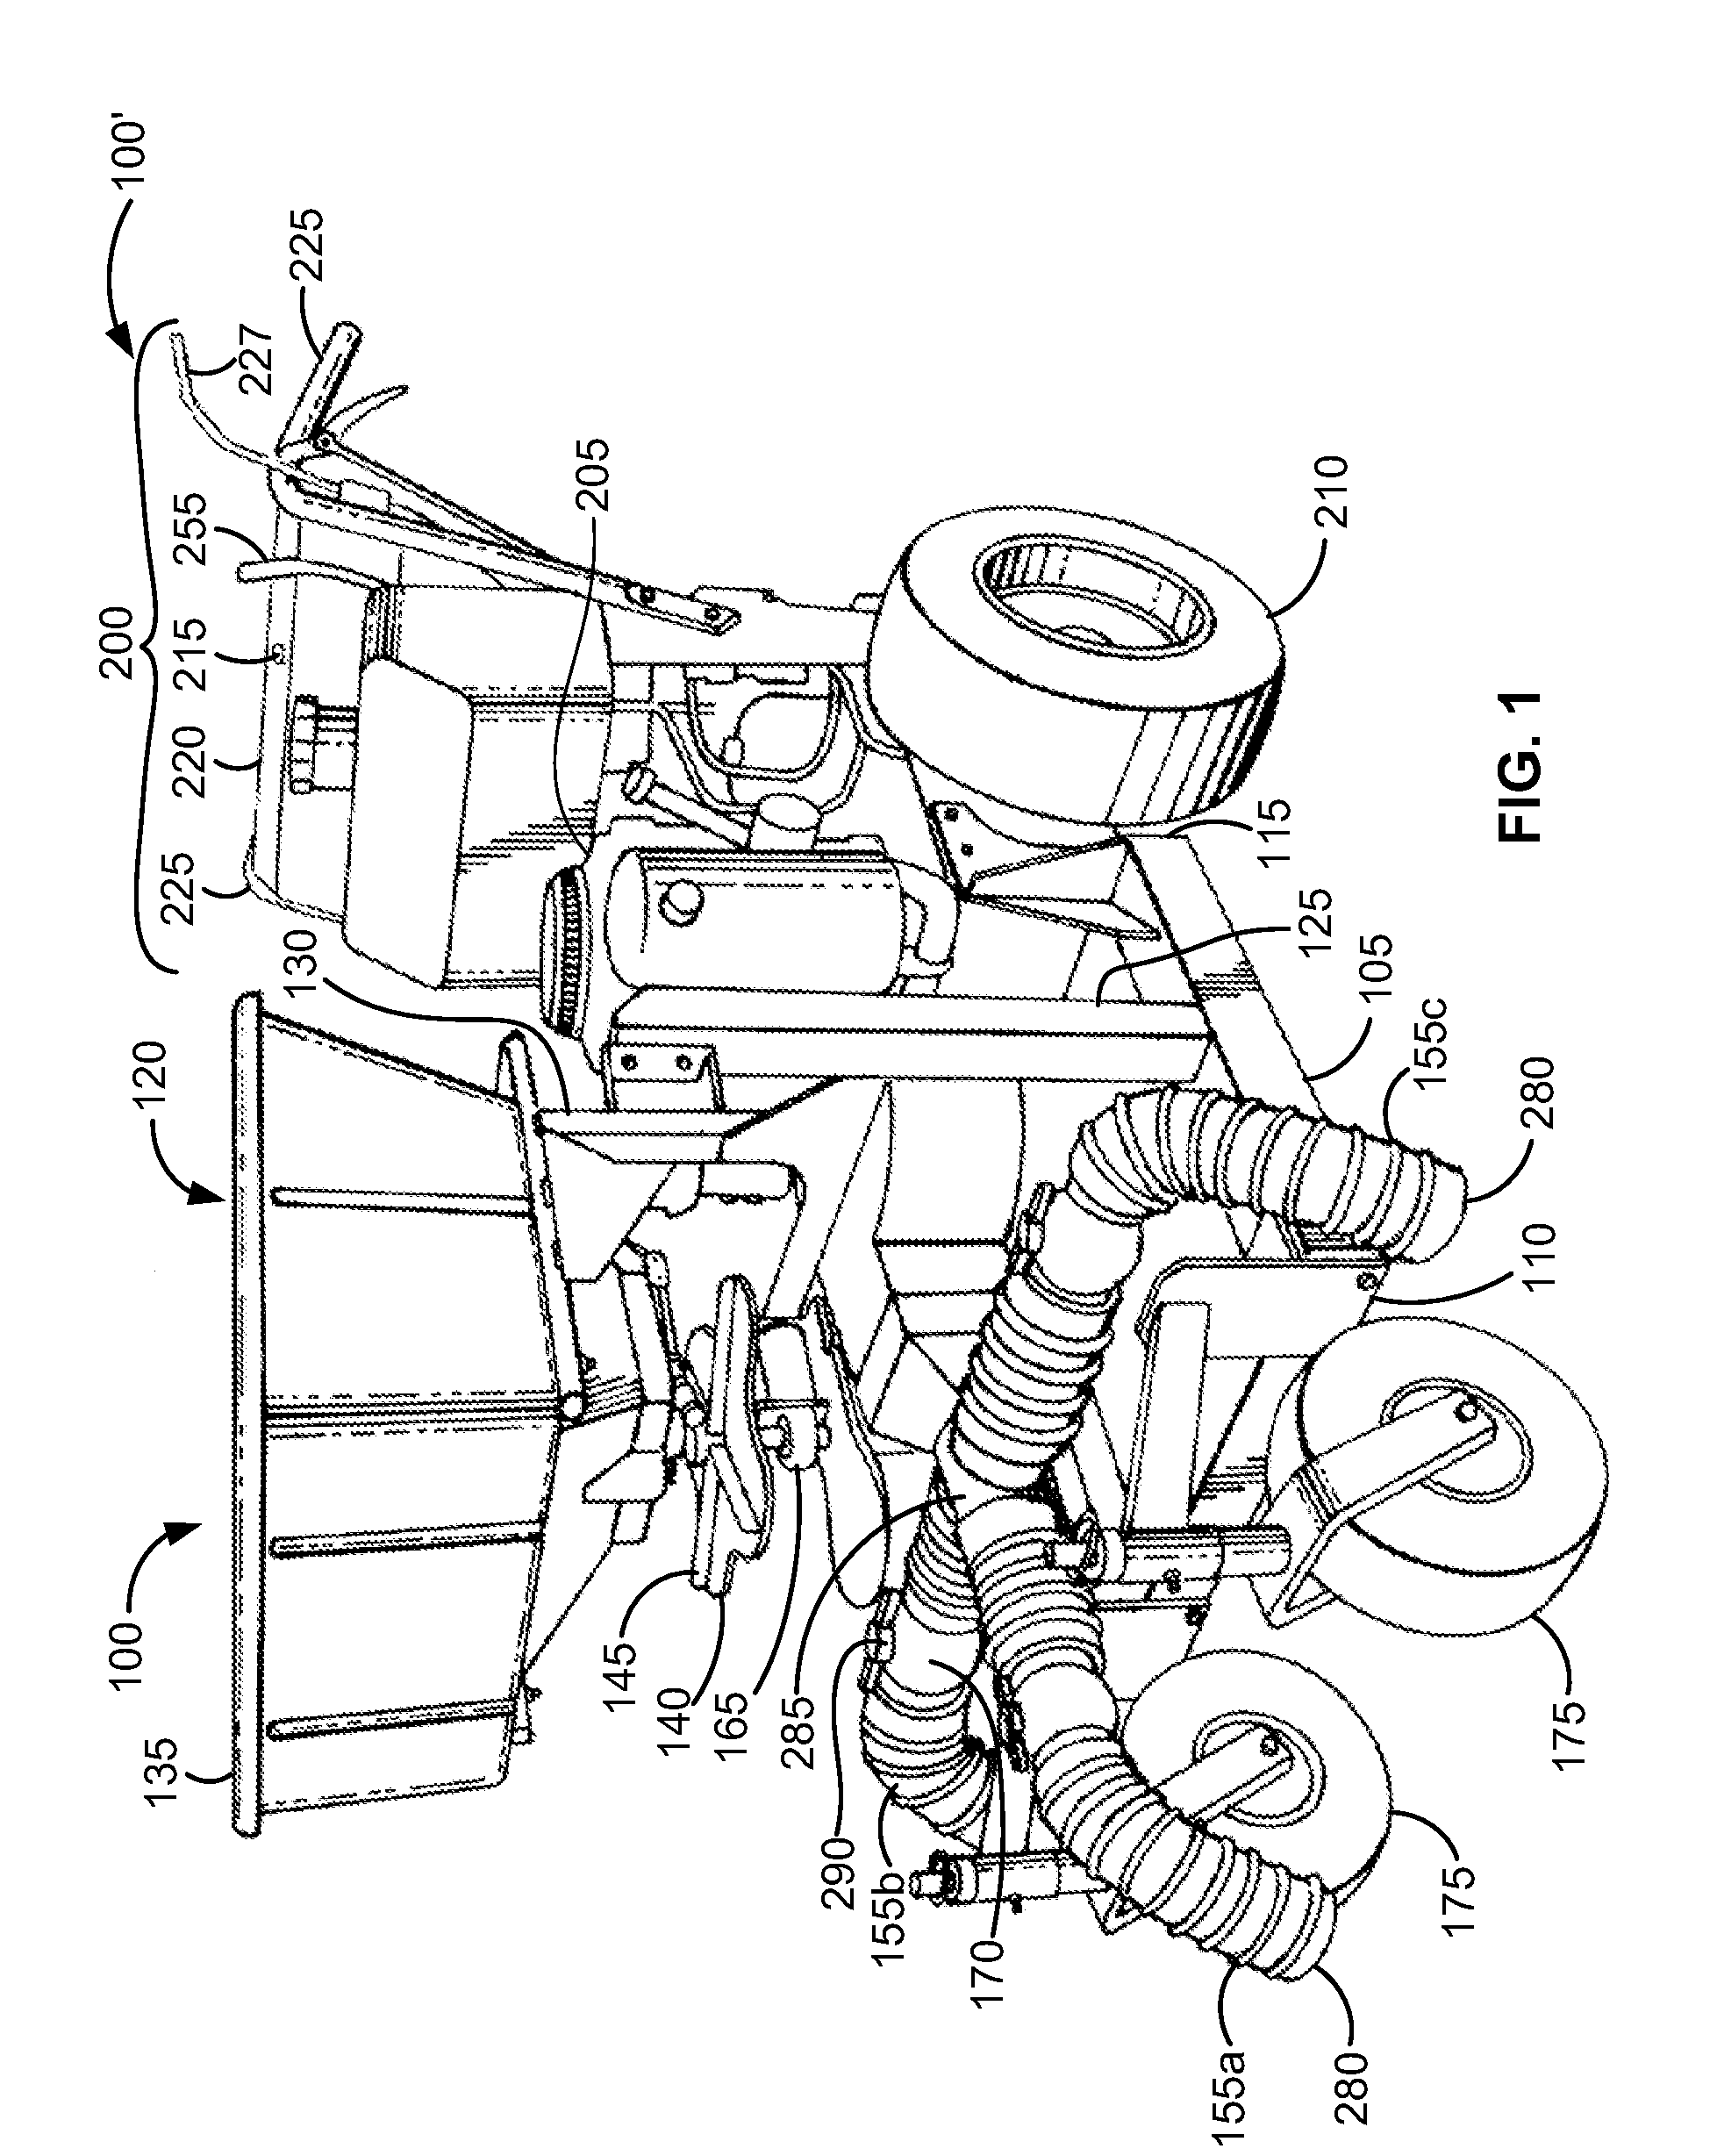 Spreader assembly with surface-clearing blower